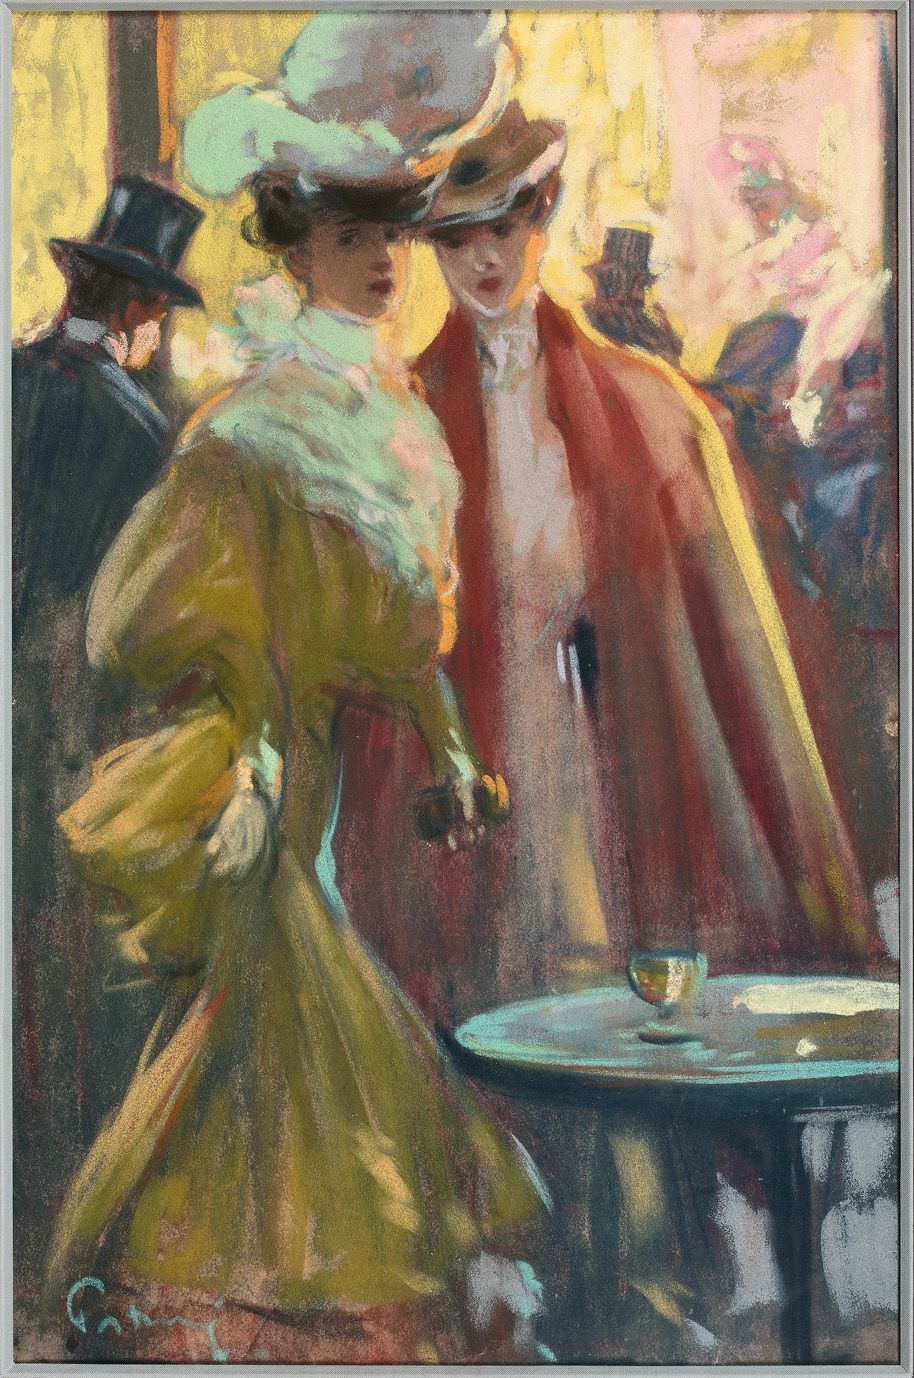 Null early 20th century french school

Paris, Elegant Women at a Café, by Night
&hellip;